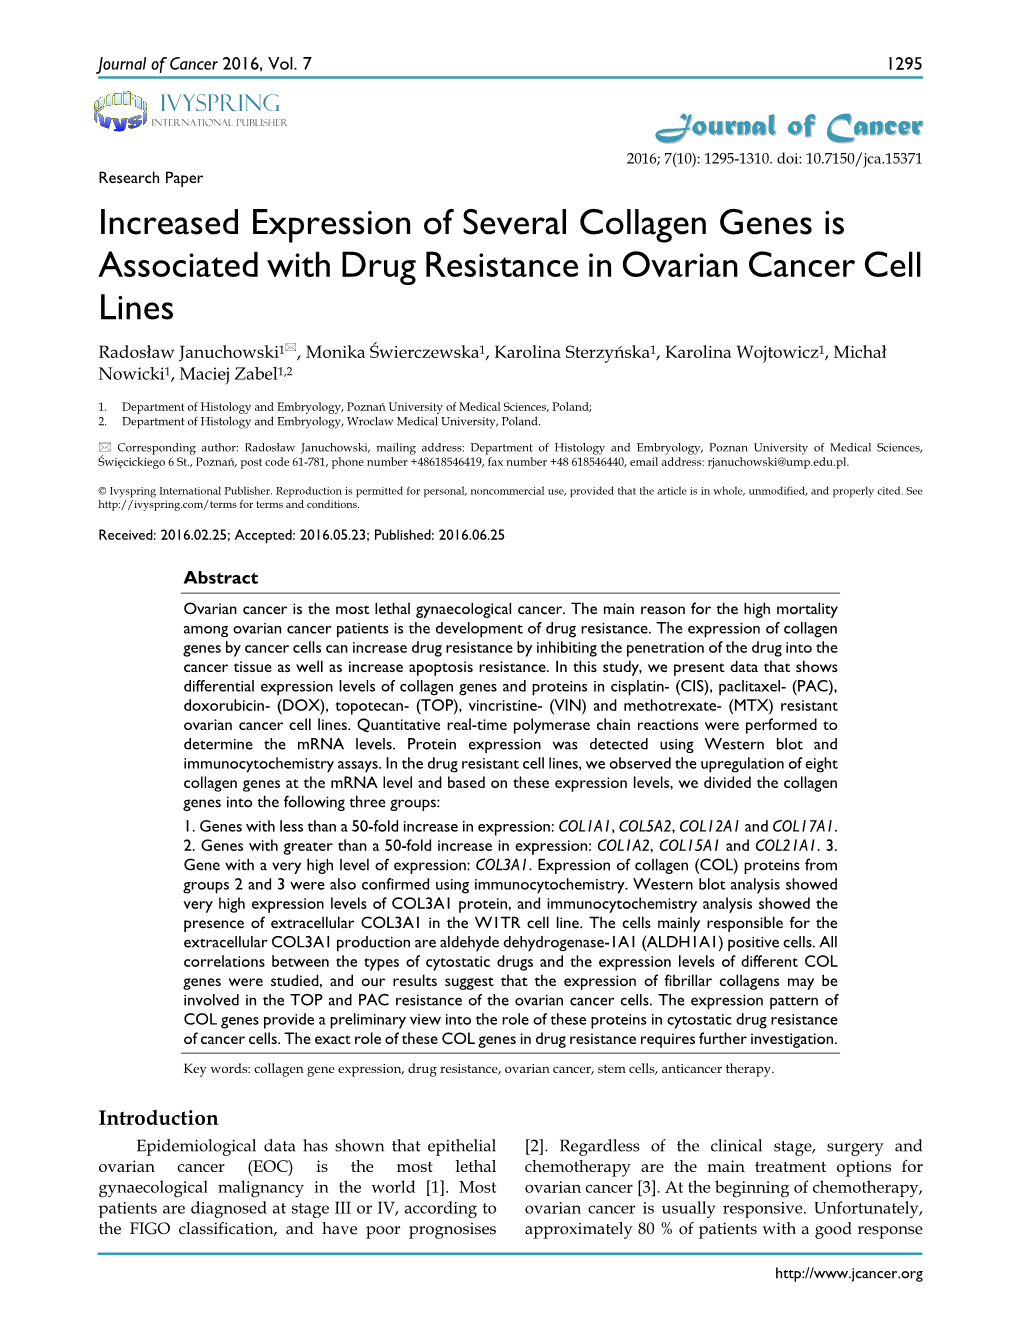 Increased Expression of Several Collagen Genes Is Associated With